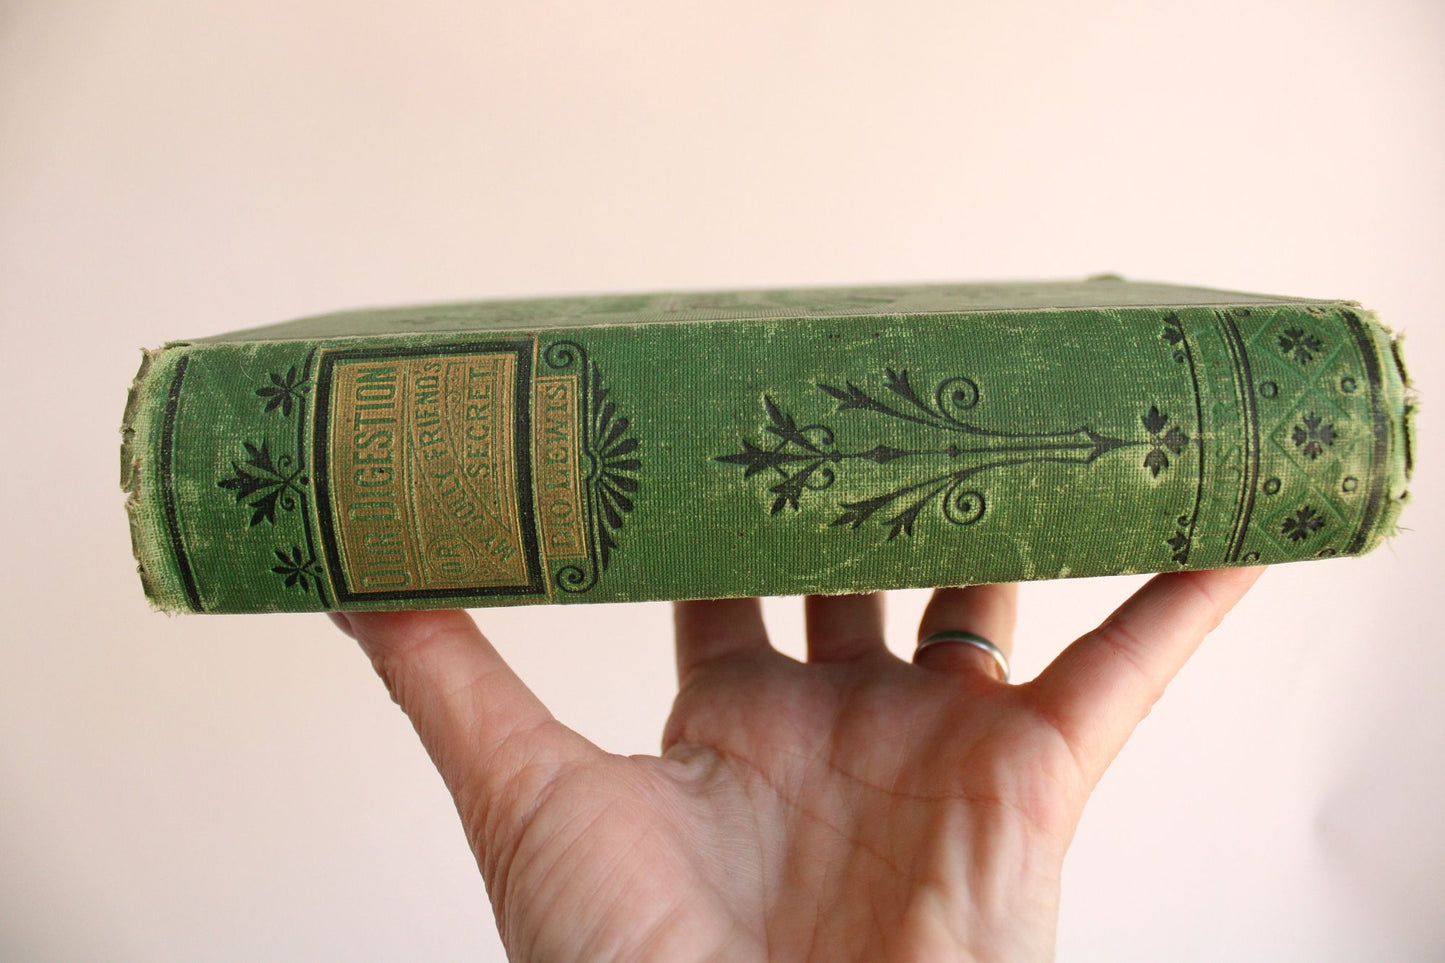 Vintage Antique 1870s Book, "Our Digestion, or My Jolly Friend's Secret" by Dio Lewis MD